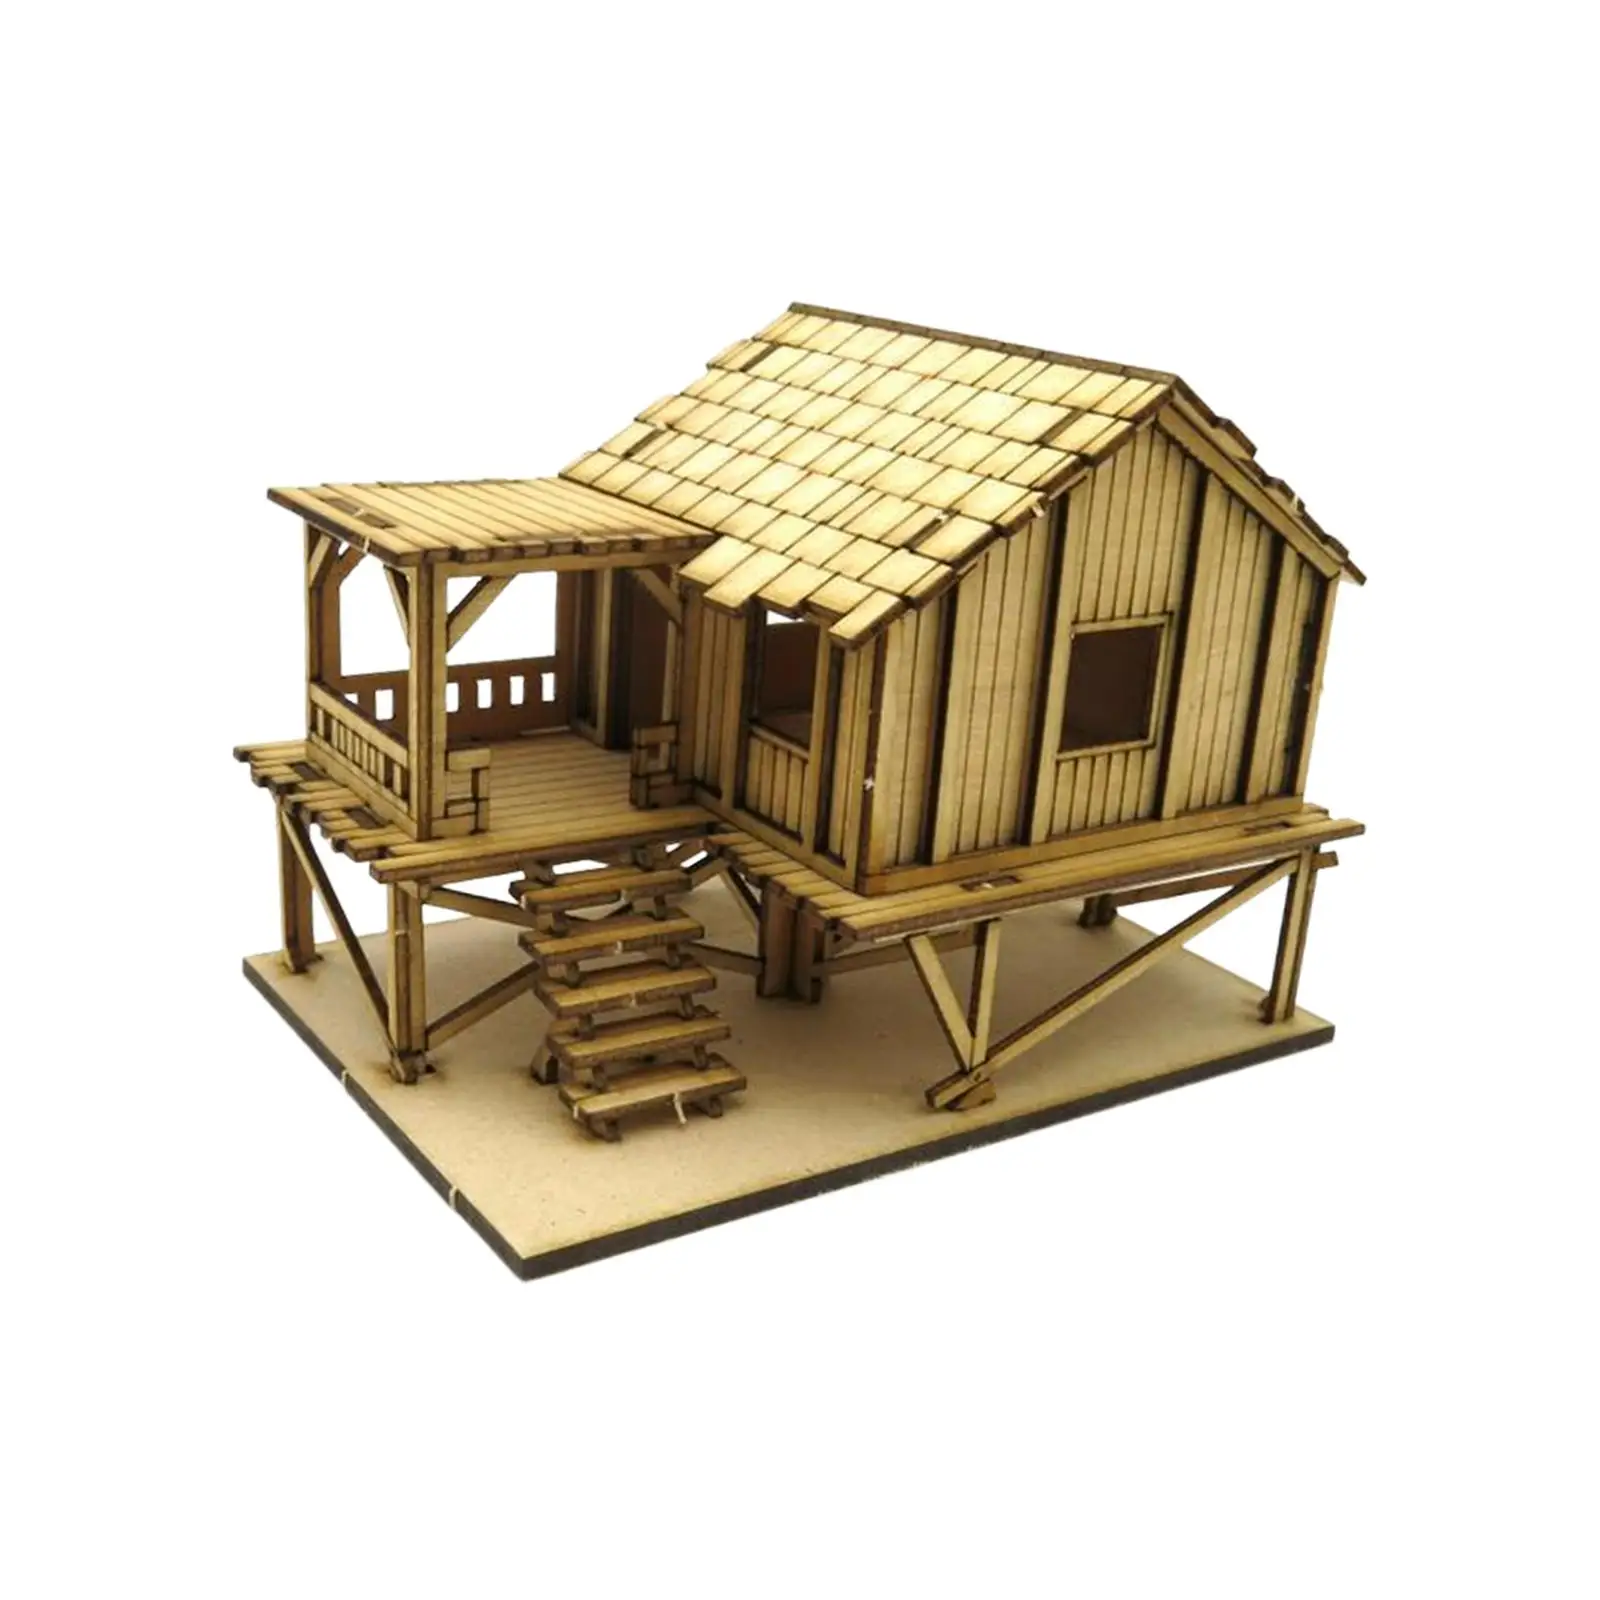 1/72 Wooden Cabin 3D Wooden Puzzle for Architecture Model Model Railway